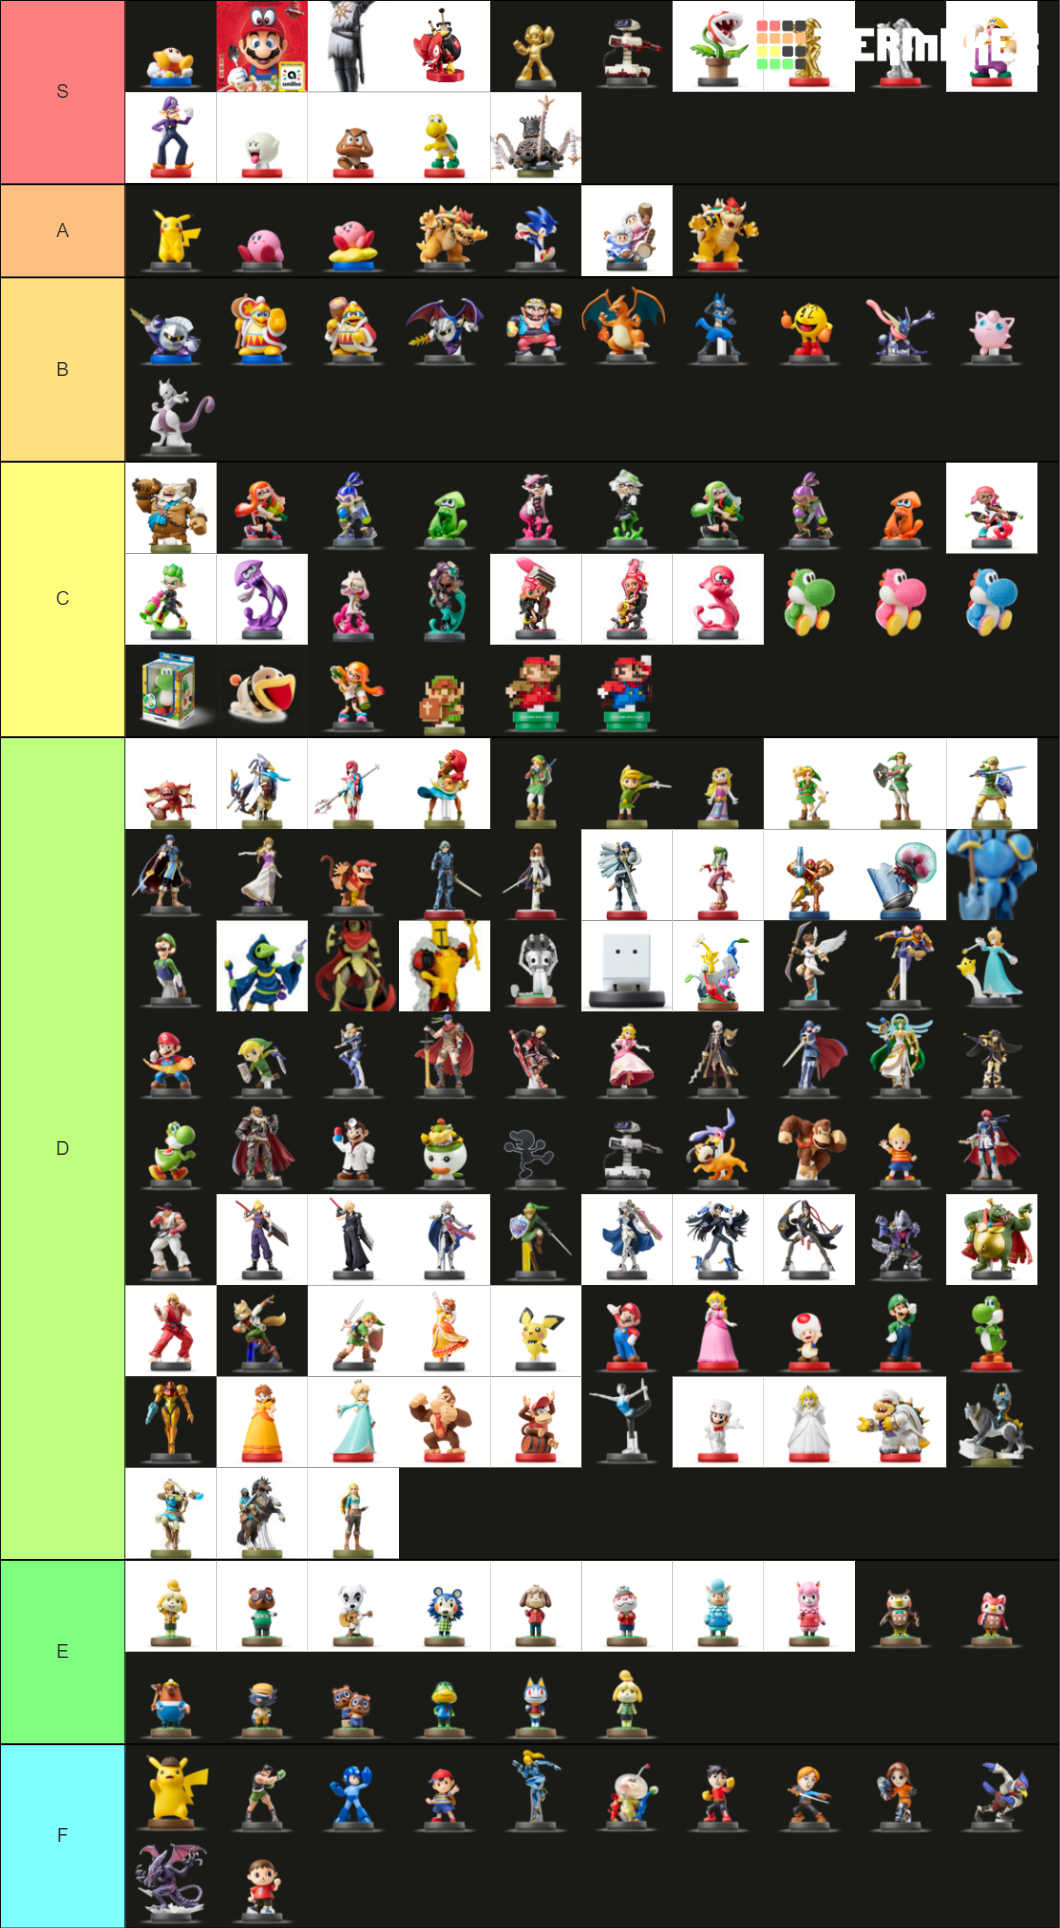 All Current Amiibo Tier List Rankings) TierMaker